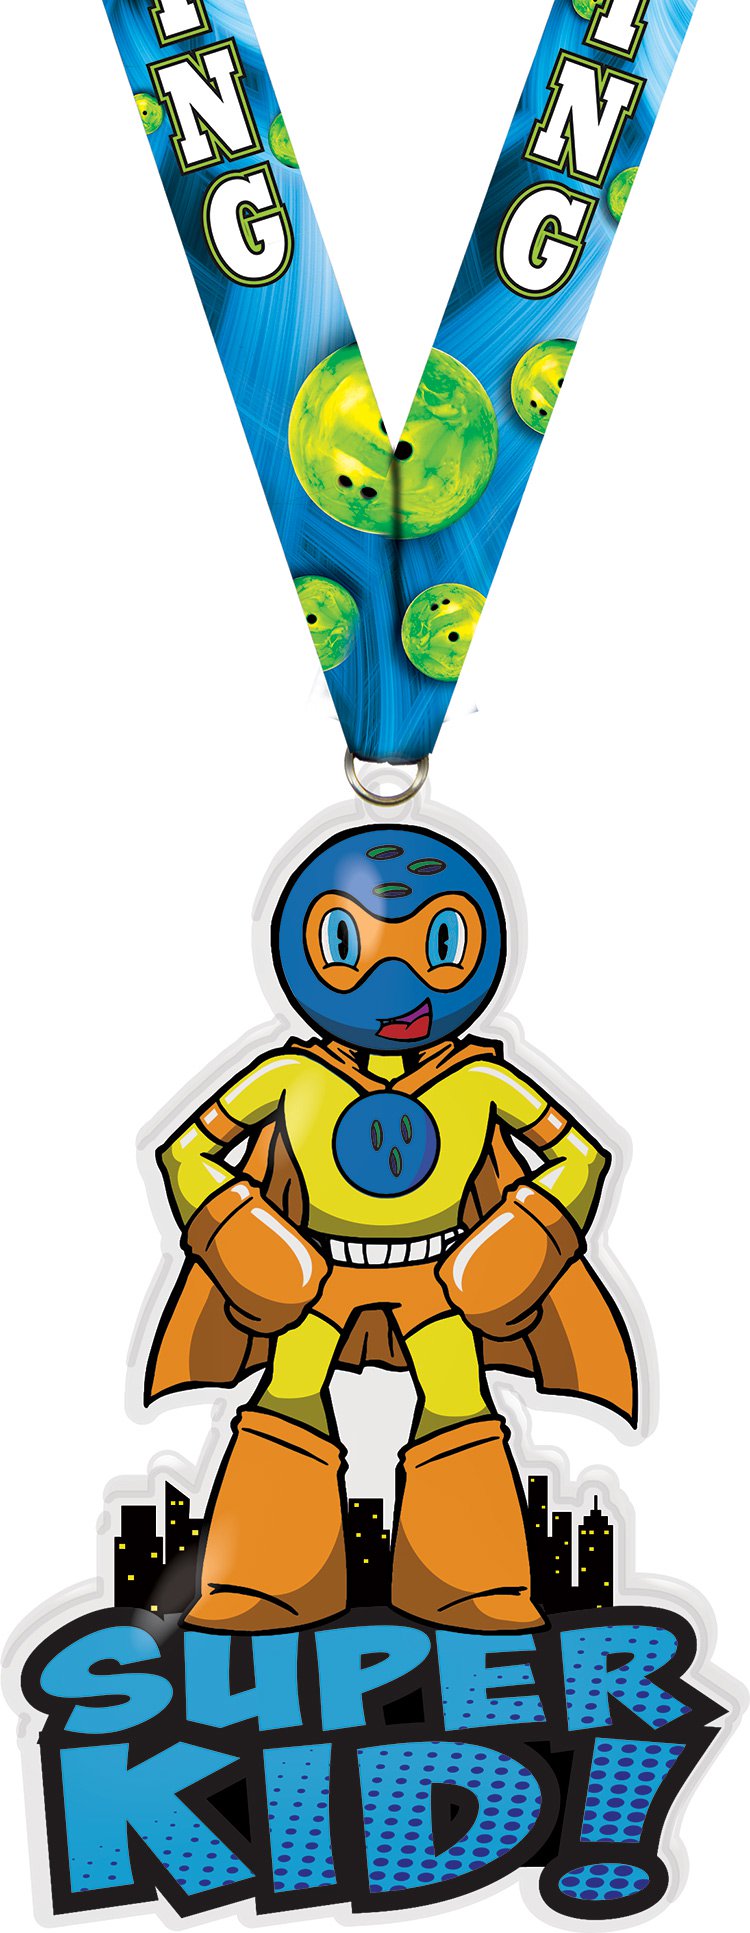 Exclusive Bowling Super Kid Acrylic Medal- 4 inch